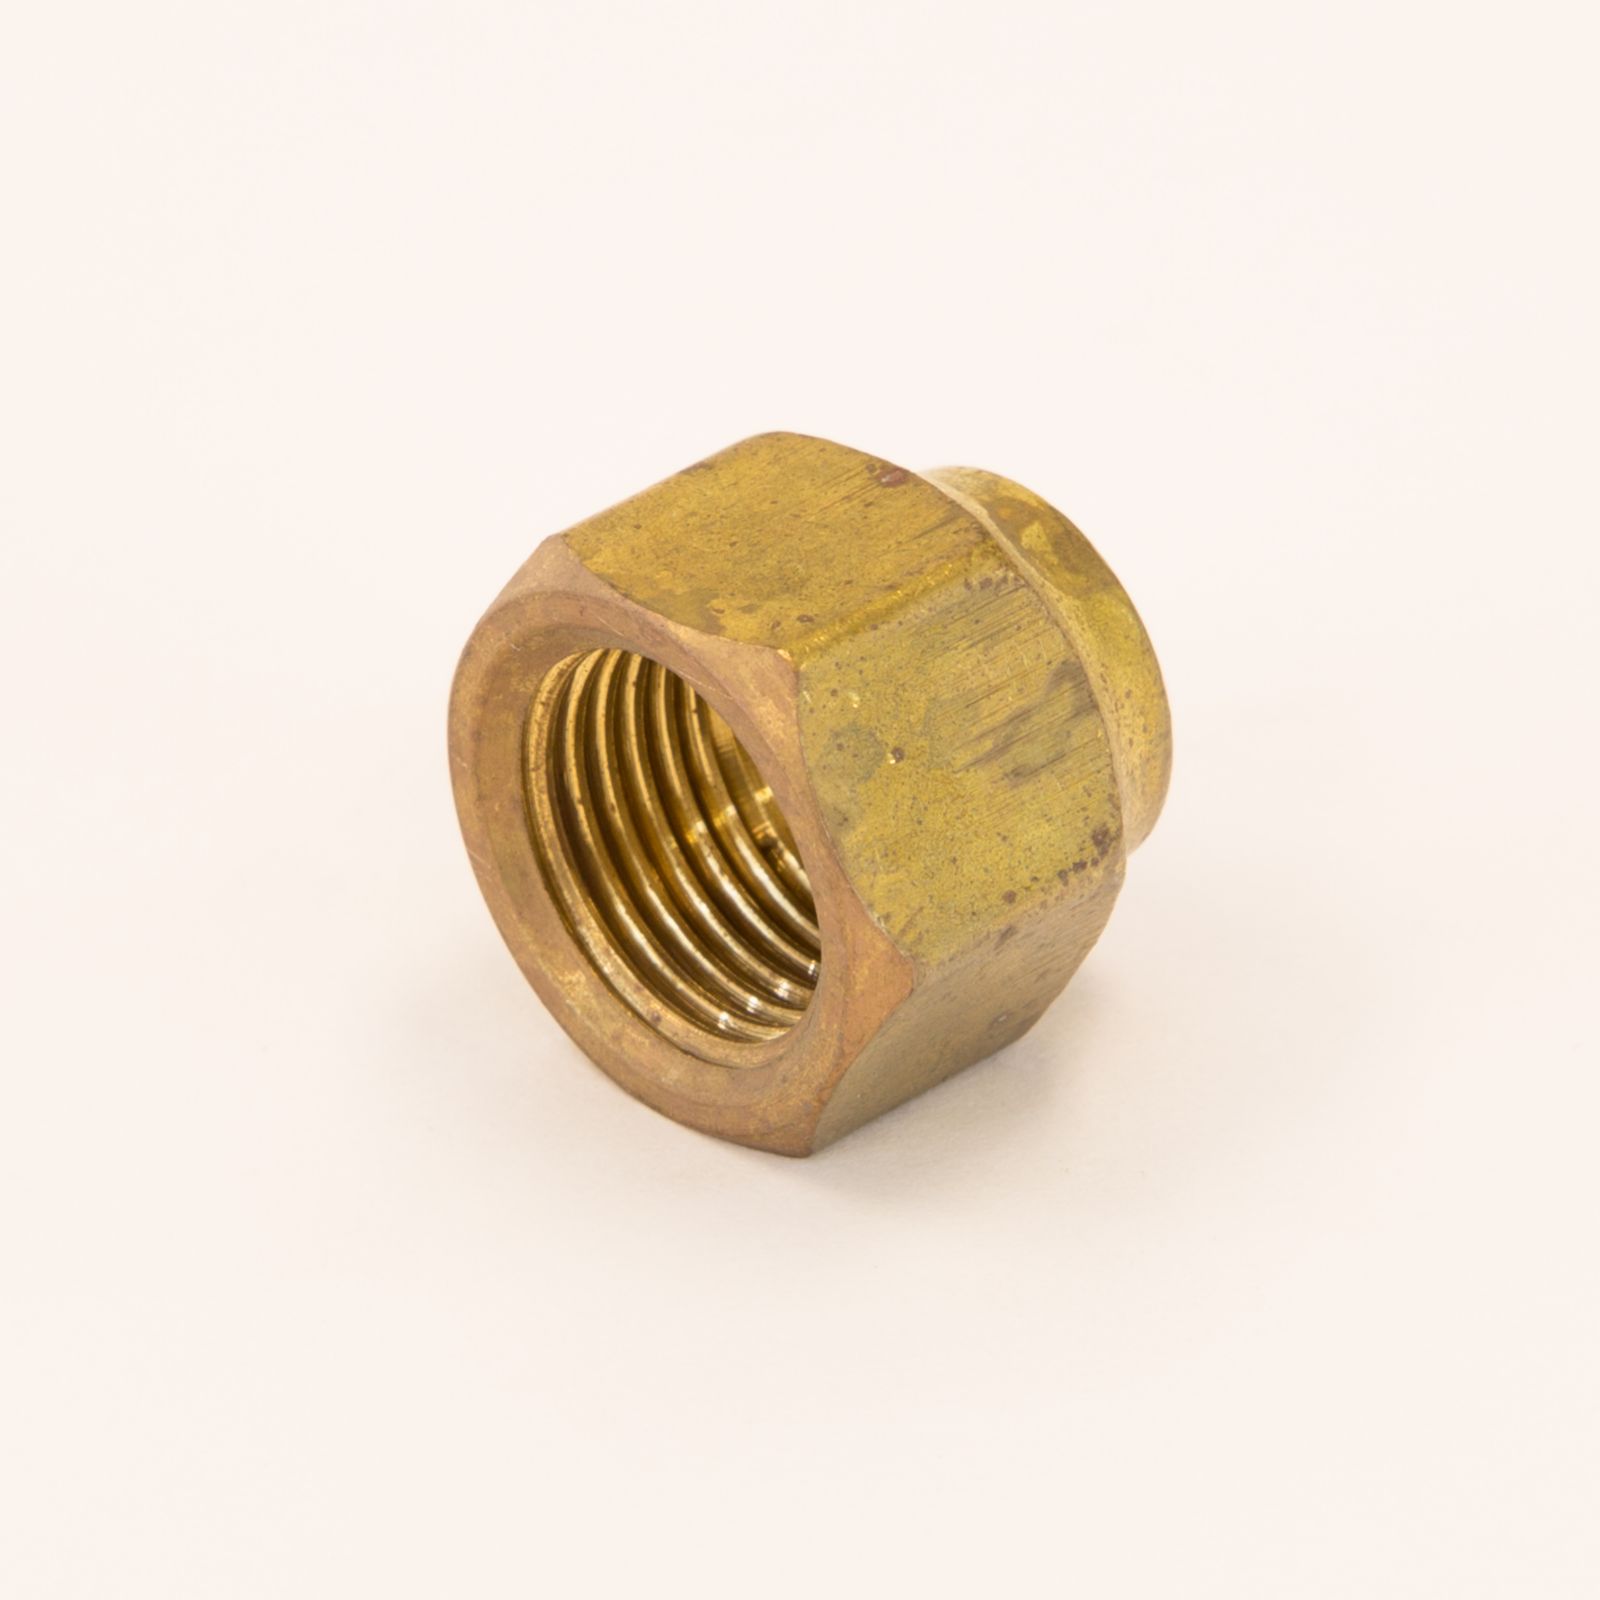 BFFNRS464 - Brass Flare Nut Tube Connection, Short Forged, Reducing, 3/8" O.D. Flare X 1/4" O.D. Tube Size, 13/16" O.D. Hex